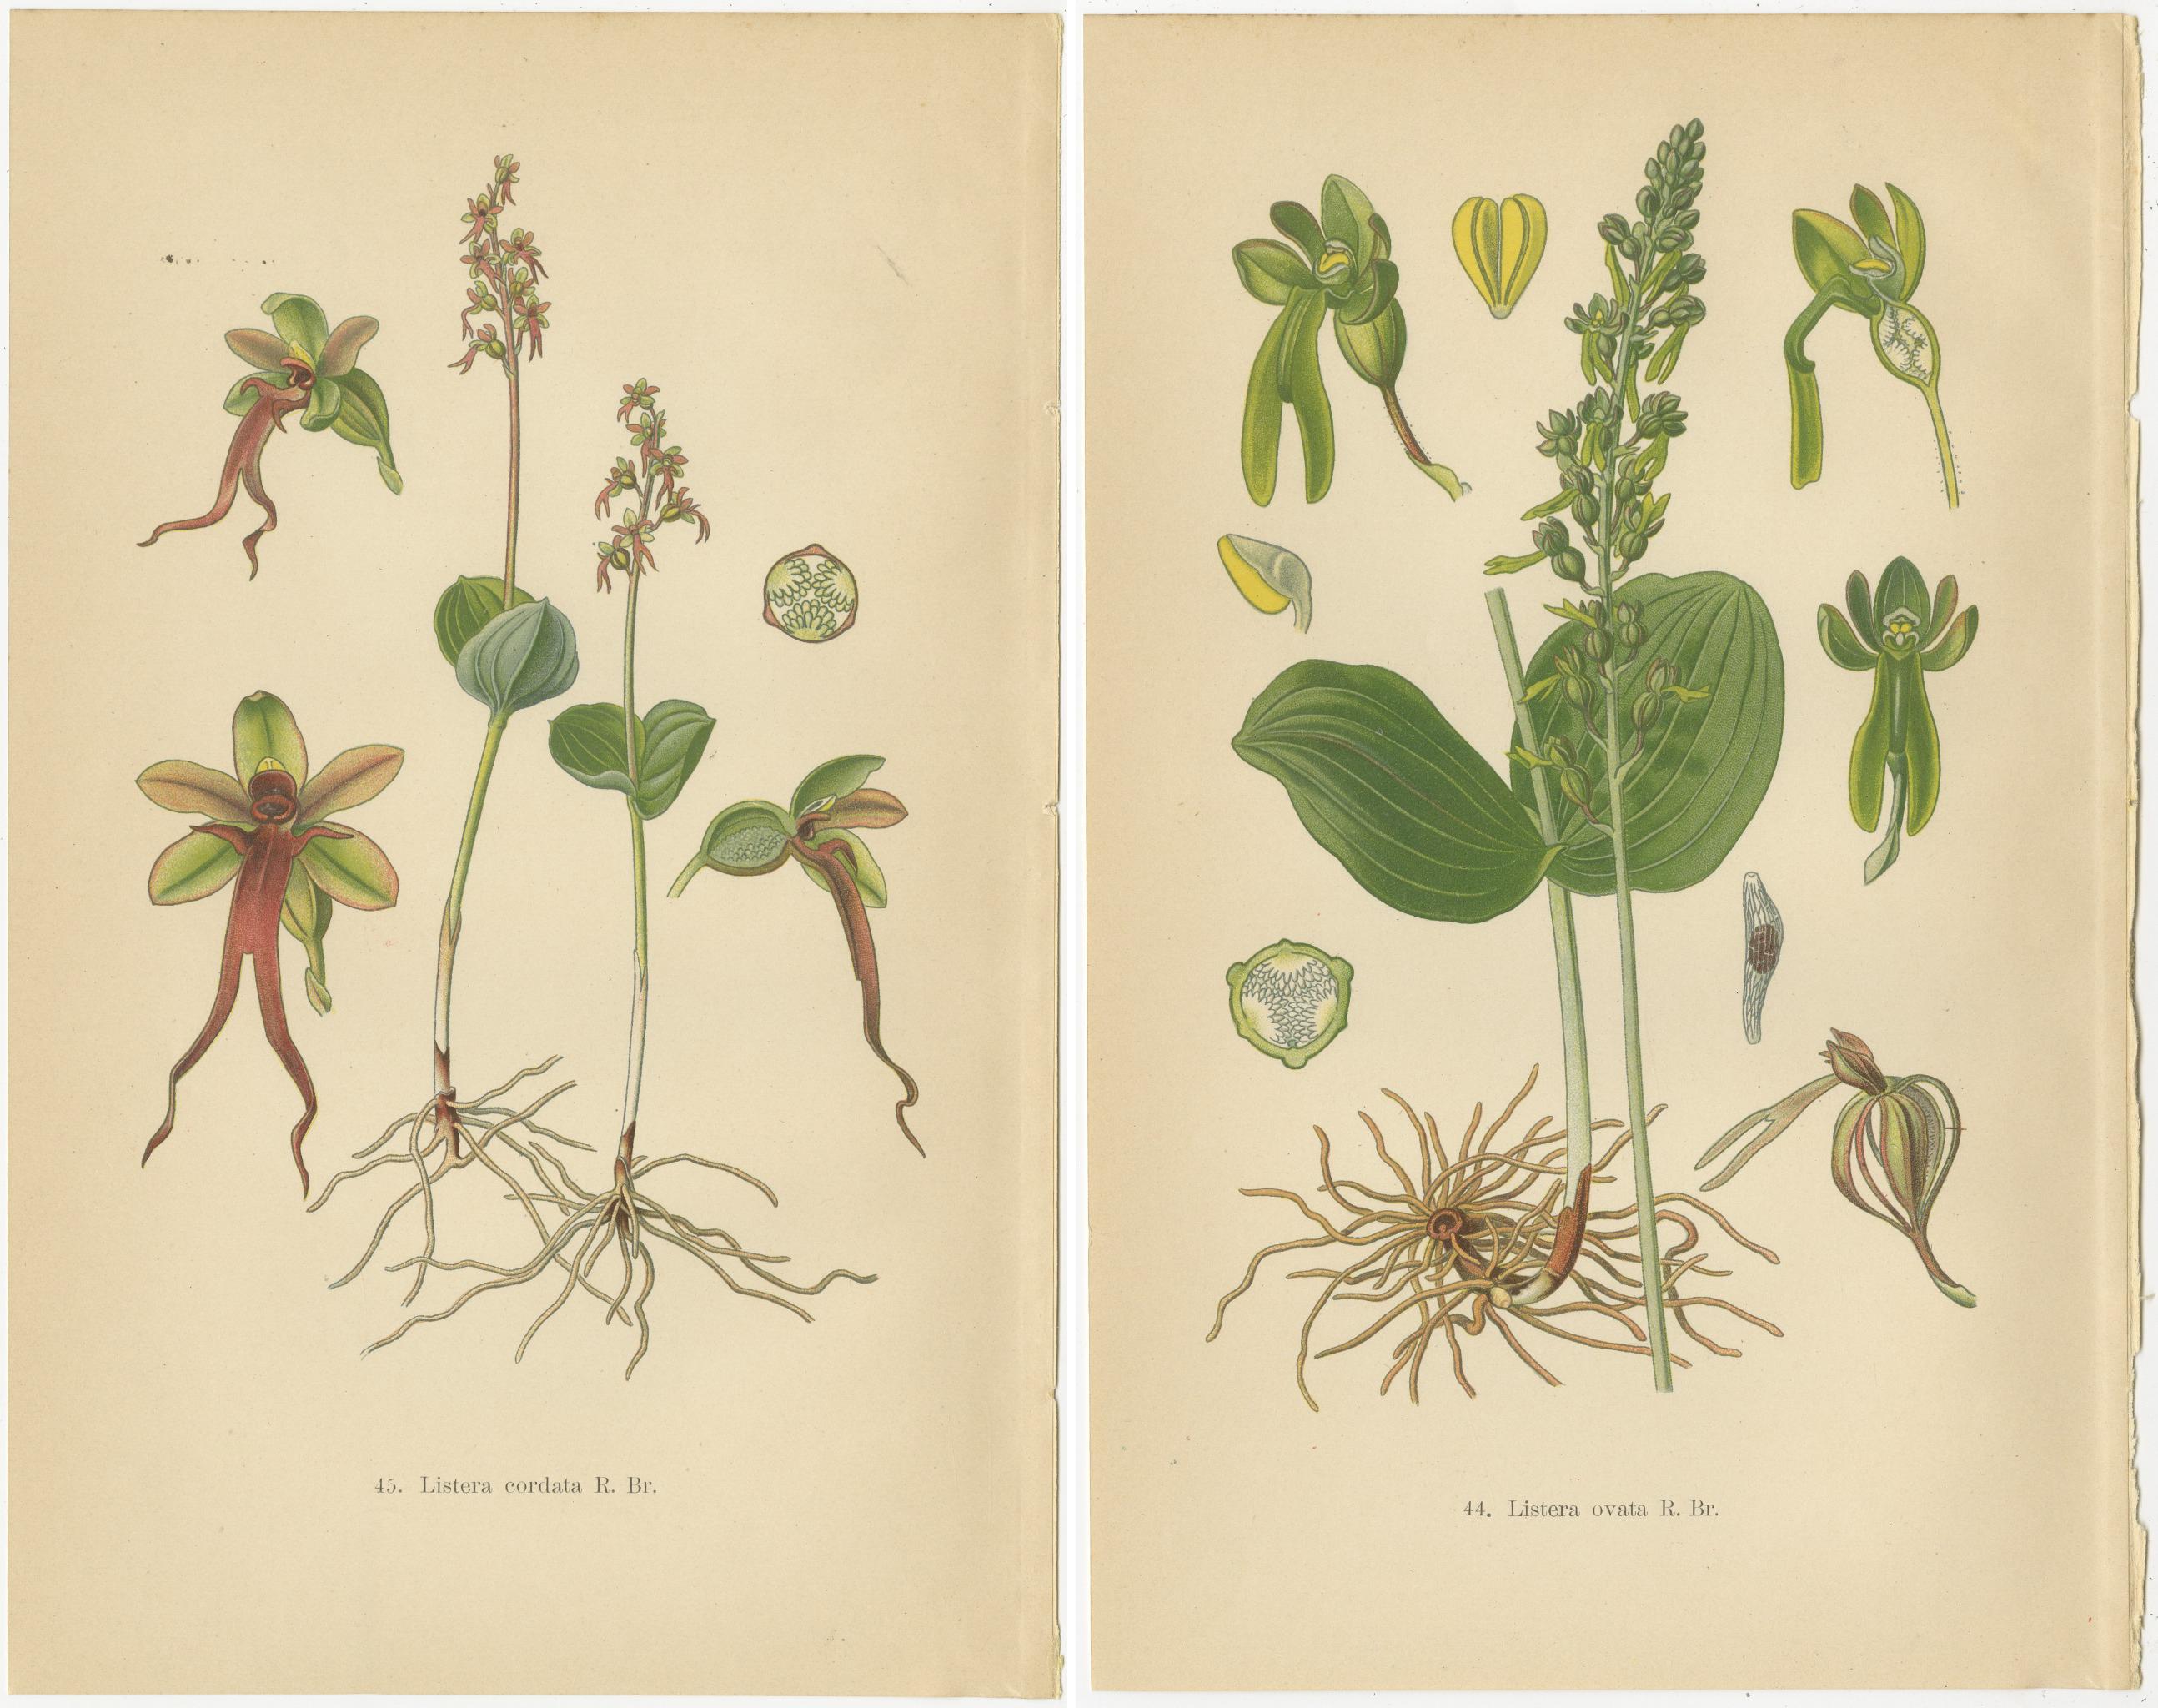 The collage features two botanical prints from the early 20th-century publication by Walter Müller, showcasing the genus Nigritella. These illustrations are typical of the period, meticulously detailed, and rendered with scientific accuracy combined